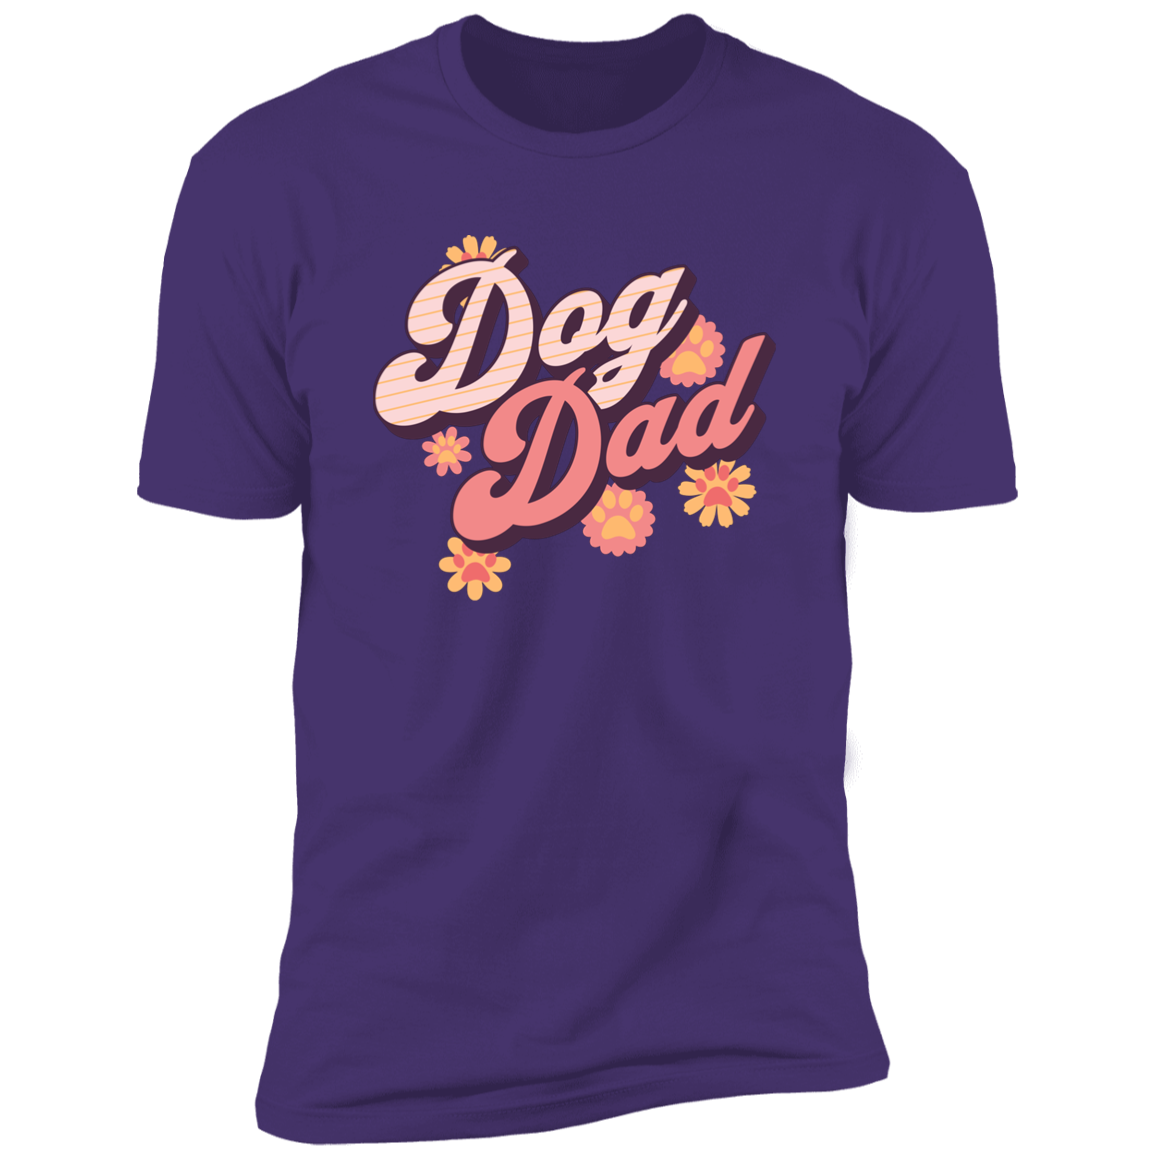 Retro Dog Dad t-shirt, Dog dad shirt, Dog T-shirt for humans, in purple rush